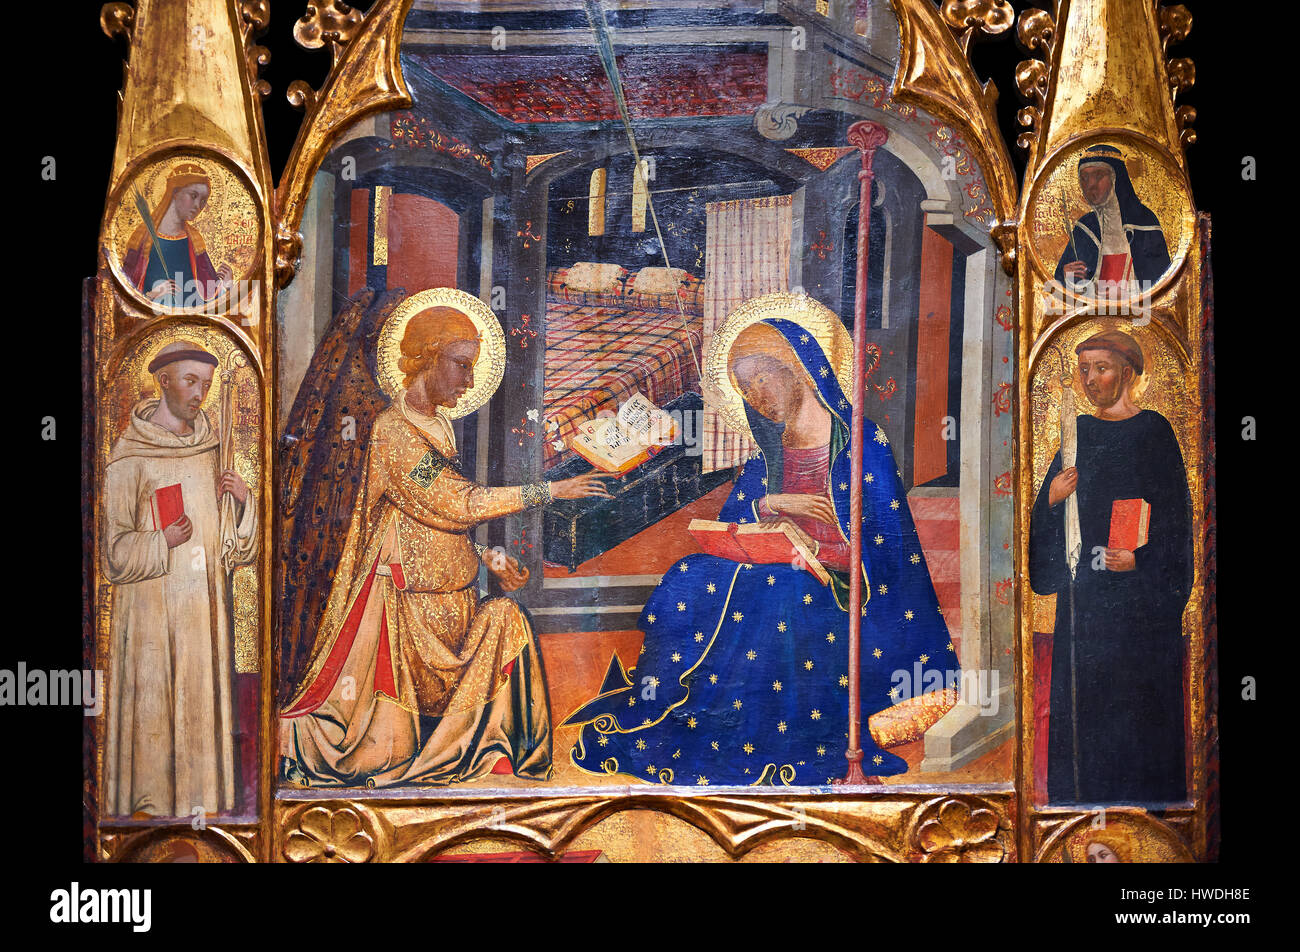 Gothic painted Panel Altarpiece of the Annunciation  by the Circle of Ferrer.  National Museum of Catalan Art, Barcelona, Spain, inv no: 015855-000 Stock Photo